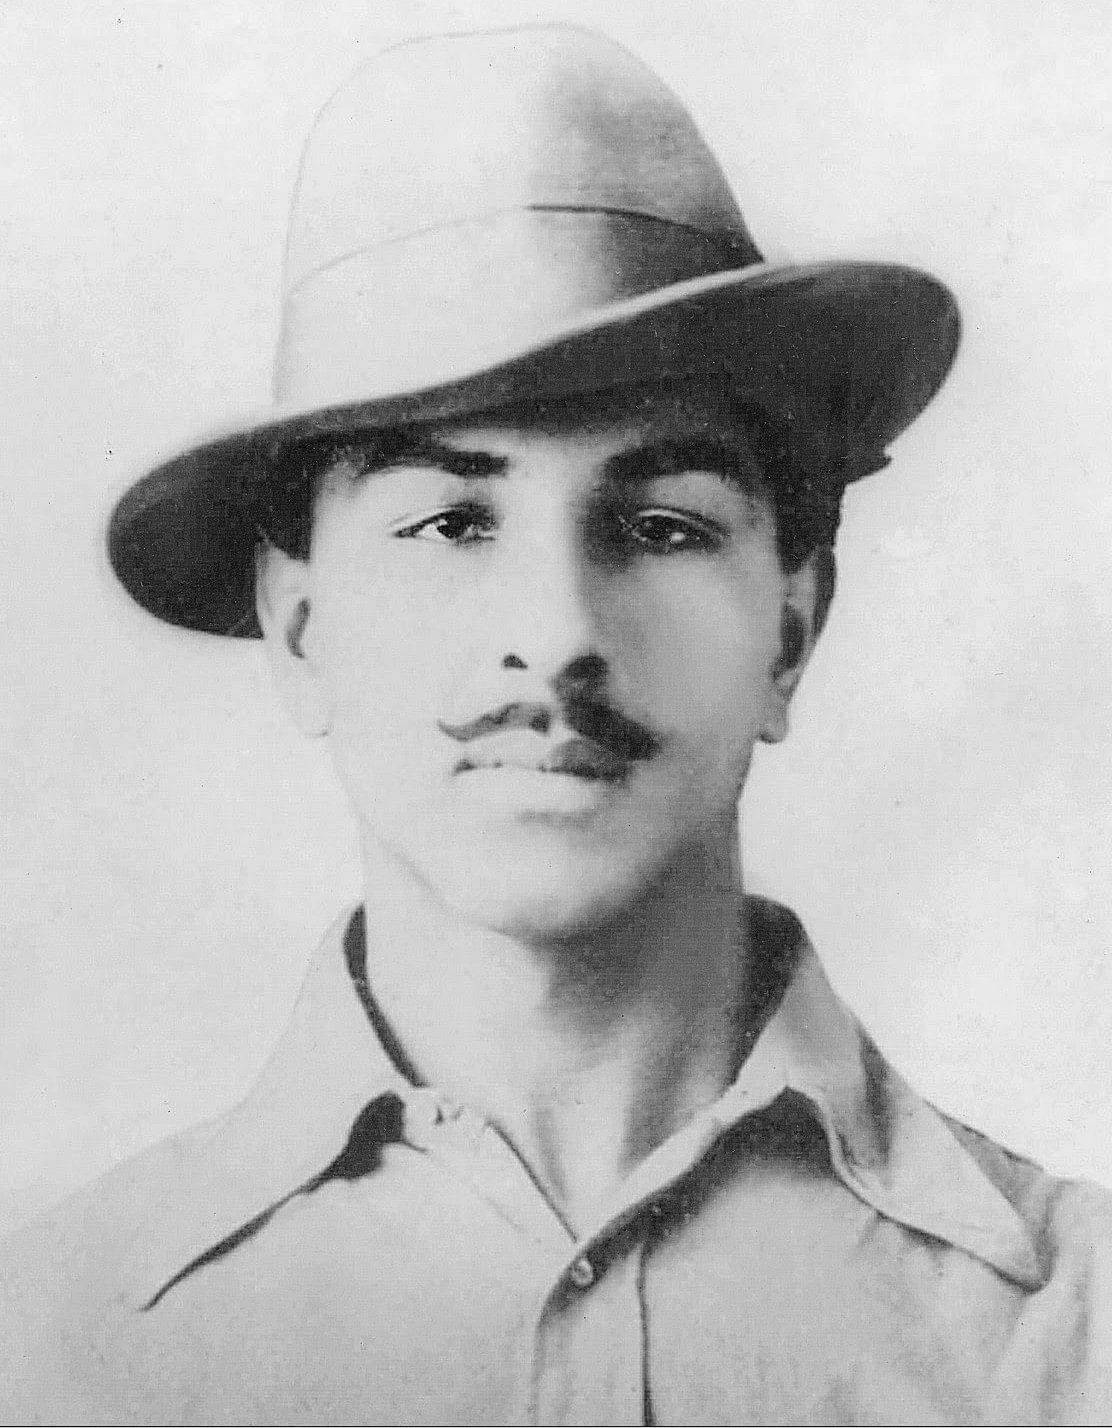 Bhagat Singh was one of the more popular revolutionaries of the freedom movement who was executed at age 23 following the shooting of a British police officer. Credit: Wikimedia Commons Photo